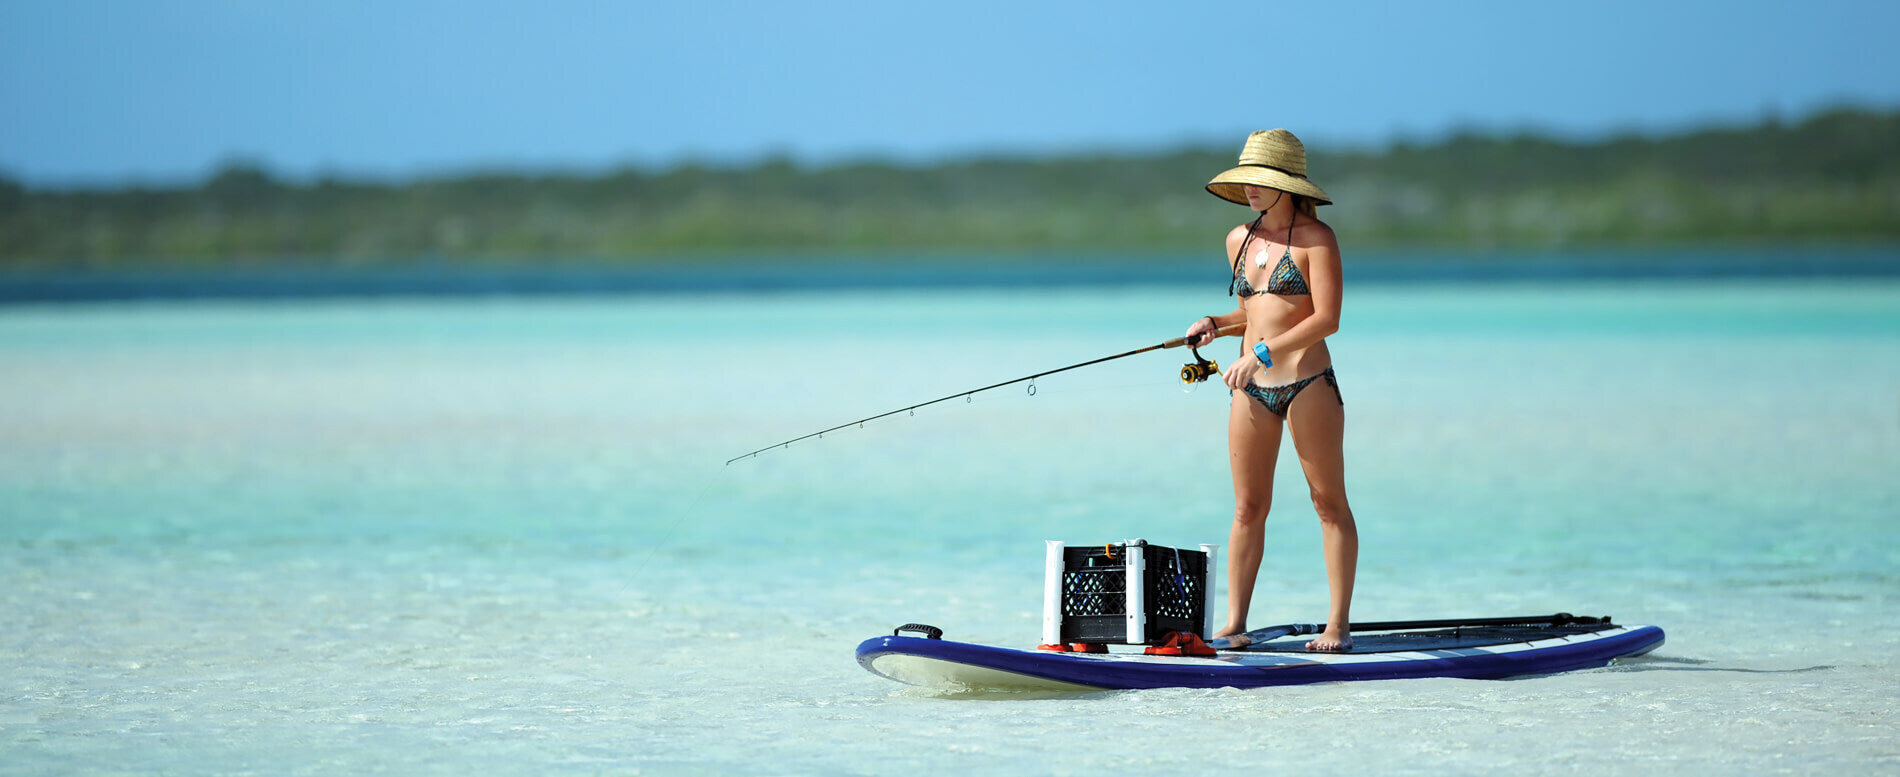 Fishing Paddle Board vs Fishing Kayak: Which is better?